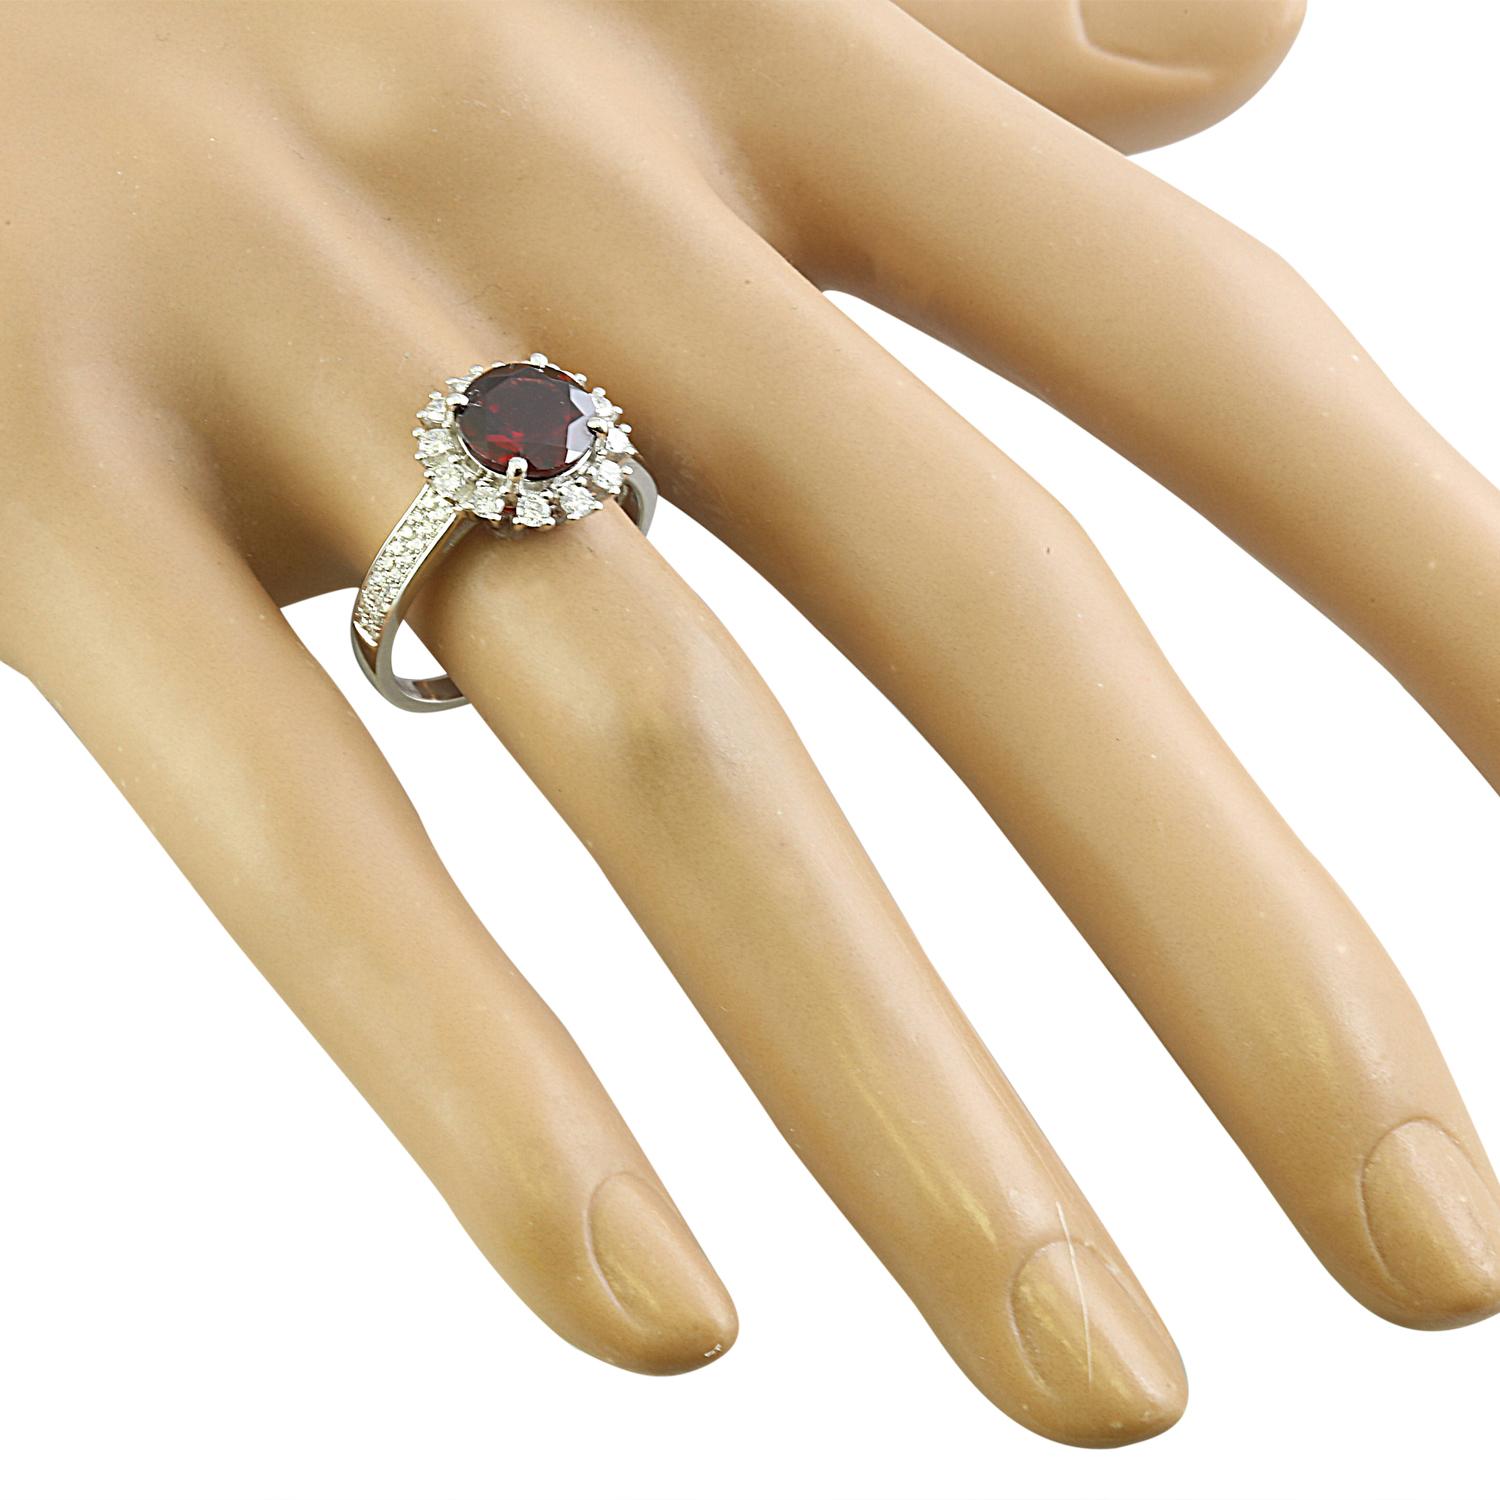 Exquisite Natural Garnet Diamond Ring in 14K Solid White Gold In New Condition For Sale In Los Angeles, CA